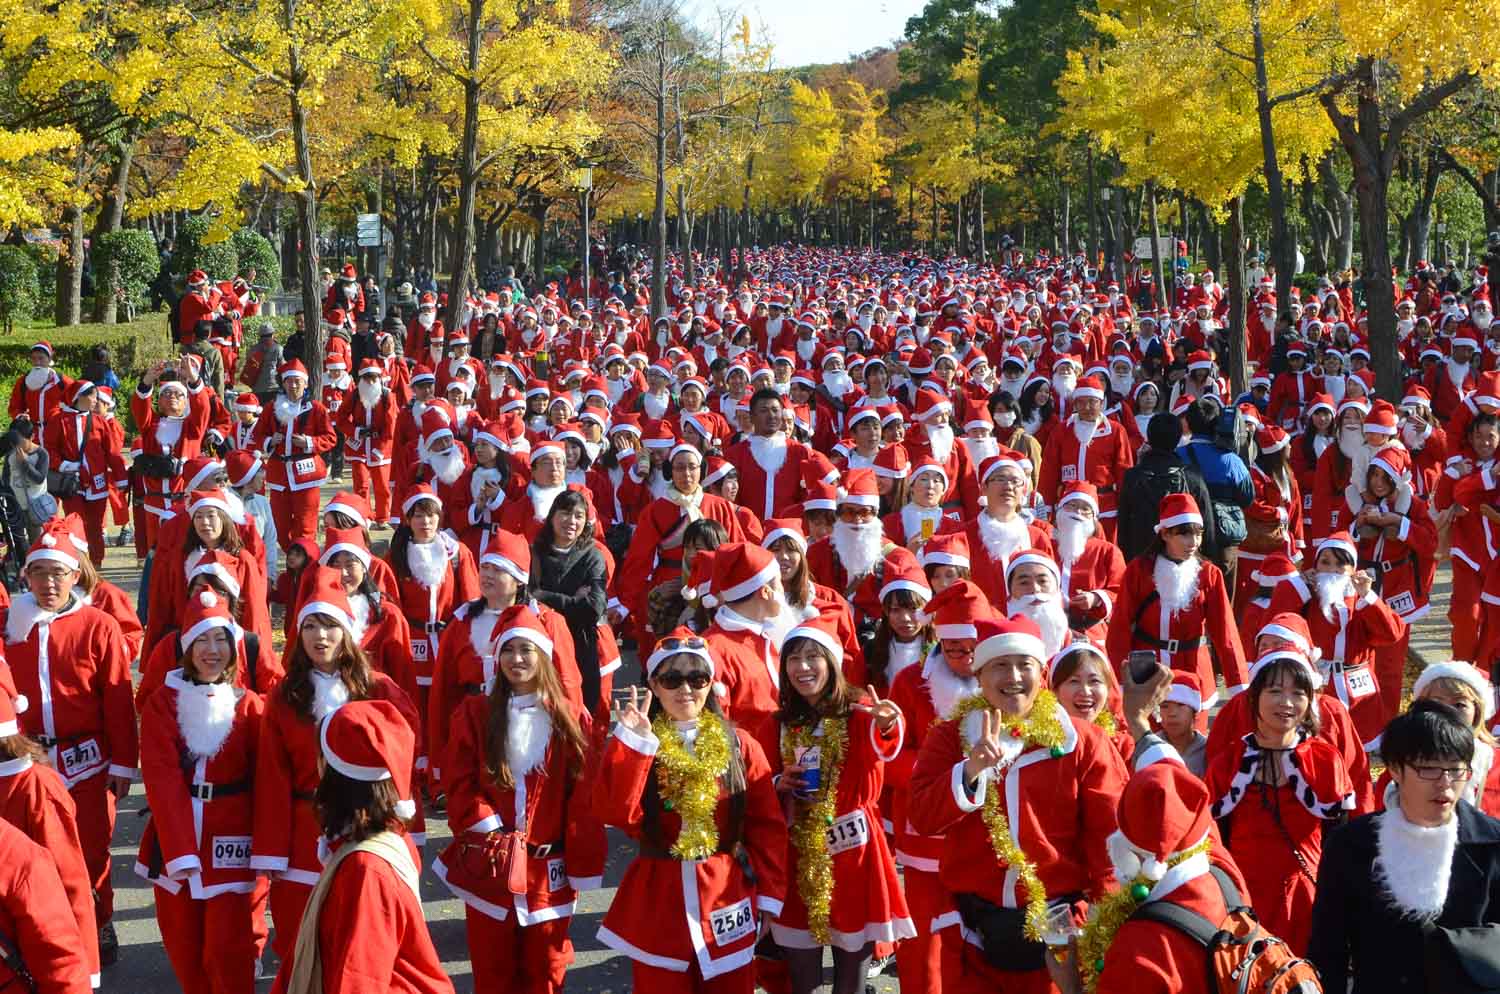  People dressed up for the annual Santa Run event in Osaka Castle Park.  